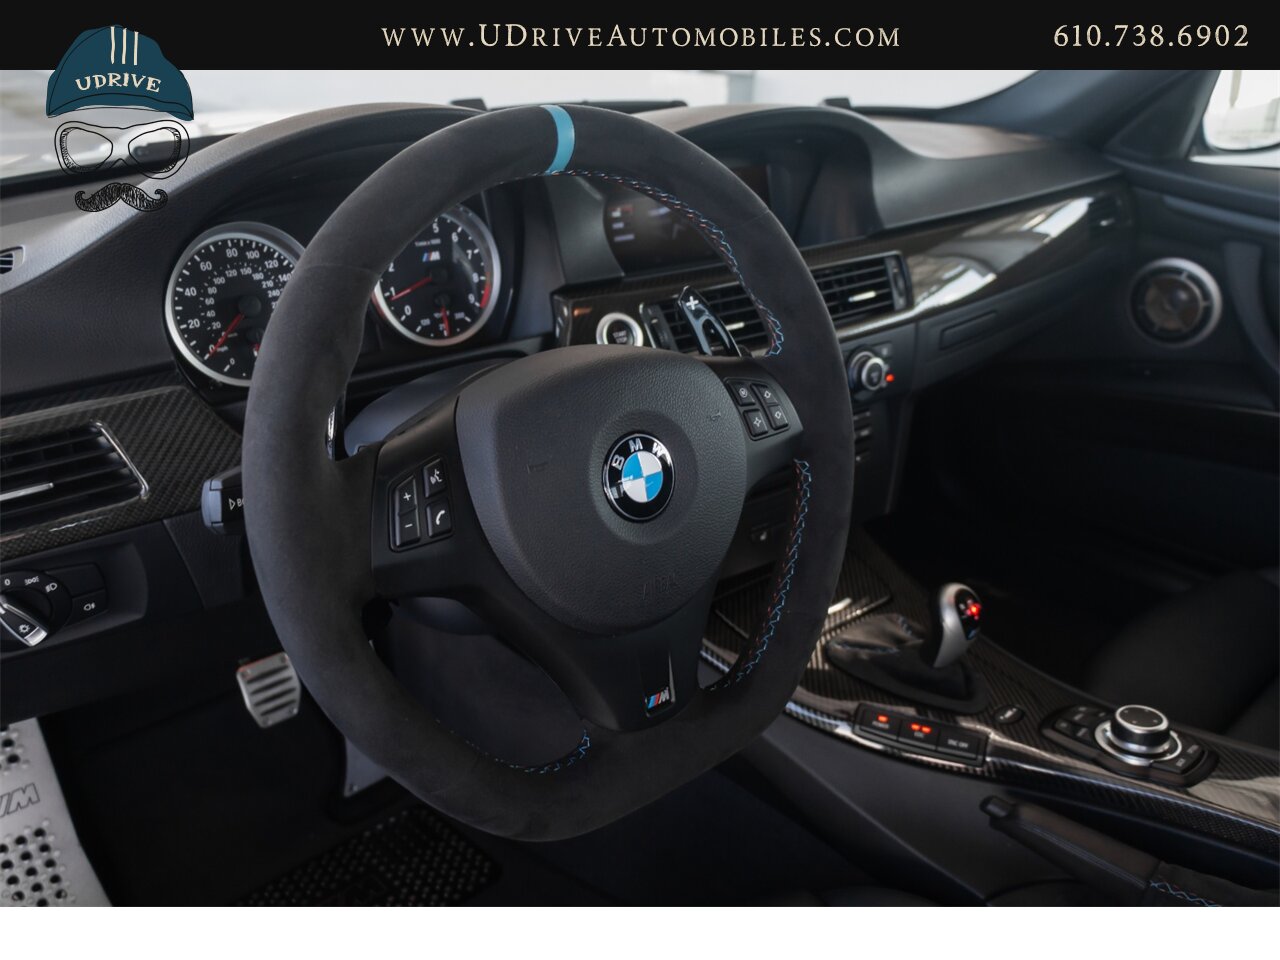 2008 BMW M3 Dinan S3-R M3 1 of 36 Produced DCT  1 Owner Full Service History 4.6L Stroker V8 - Photo 30 - West Chester, PA 19382